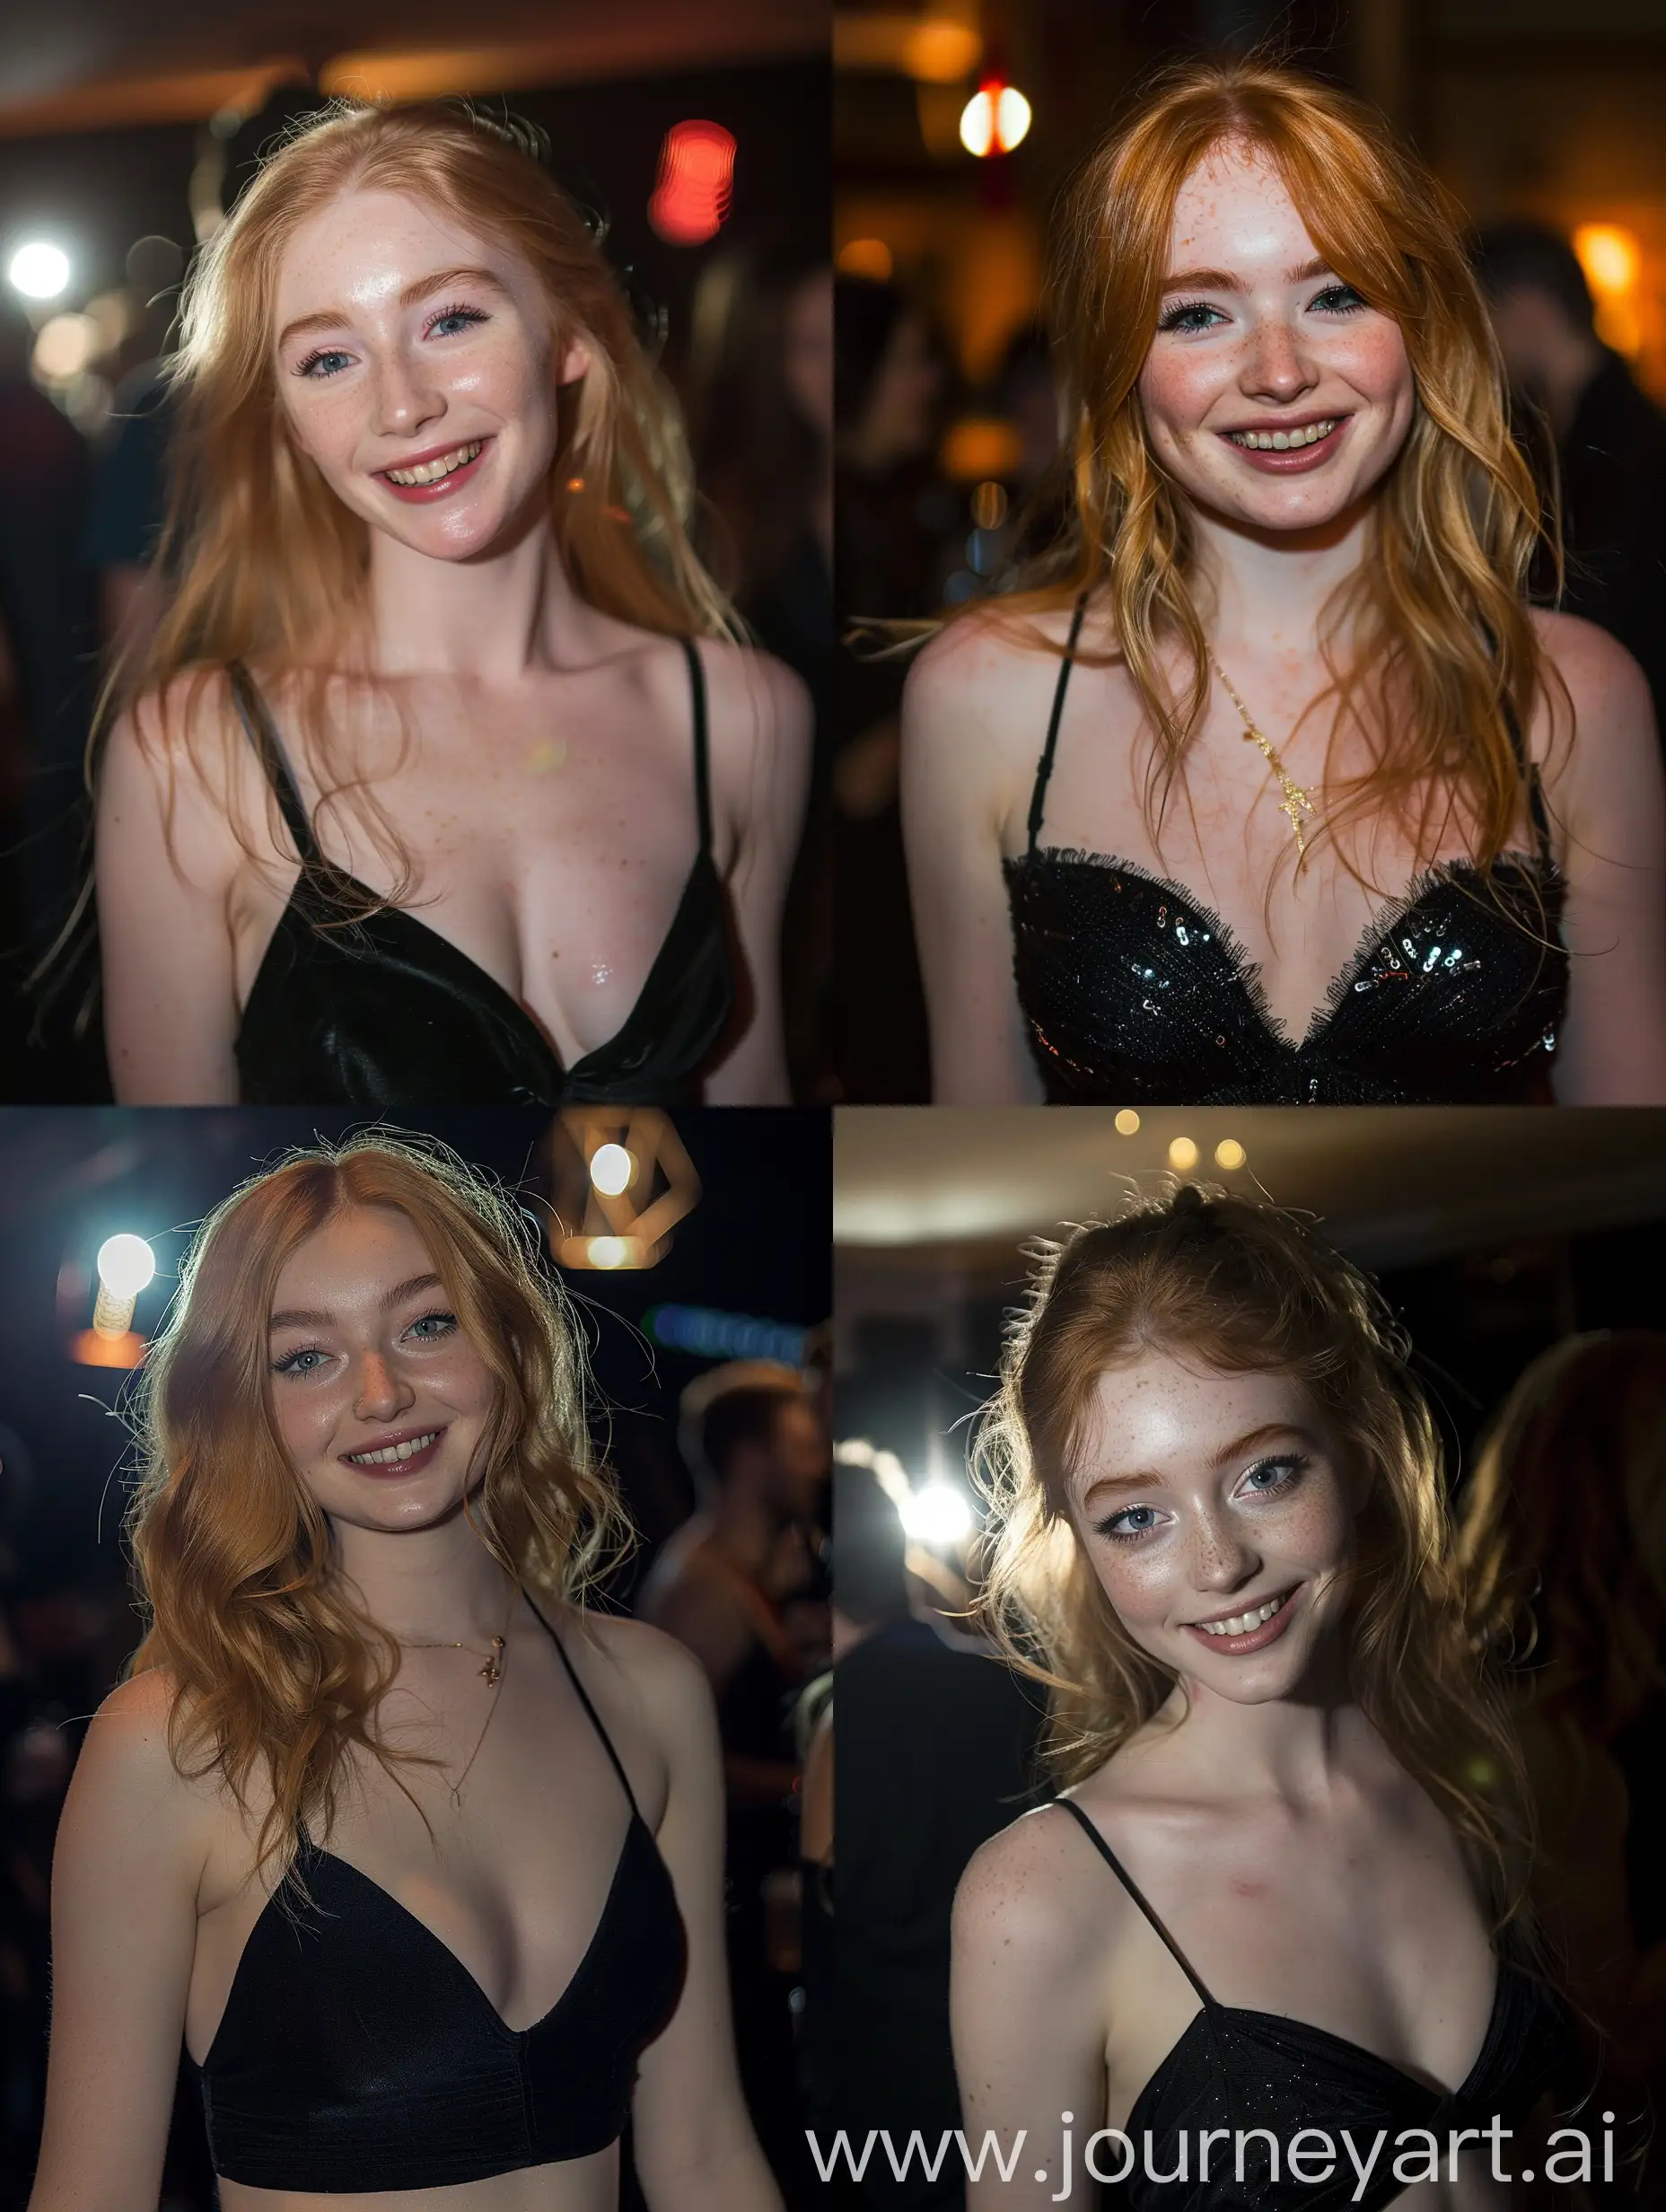 redhead scottish girl, 19 years old, blond hair, at the party, at night, flash, flash light, , makeup, beauty, black dress, fitness, smilling